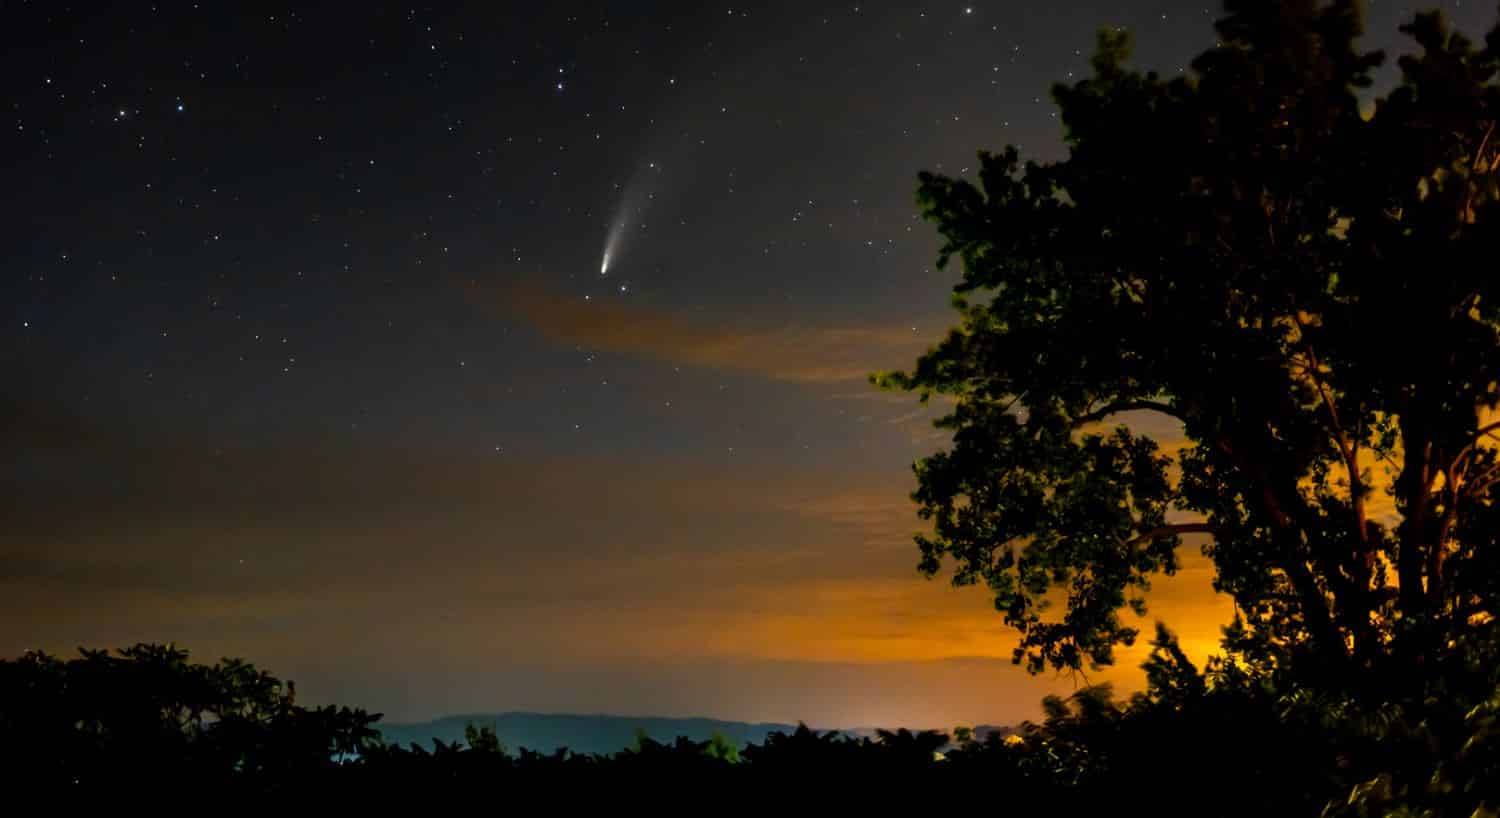 Sky at dusk with visible stars and comet in the background and a green tree on the right